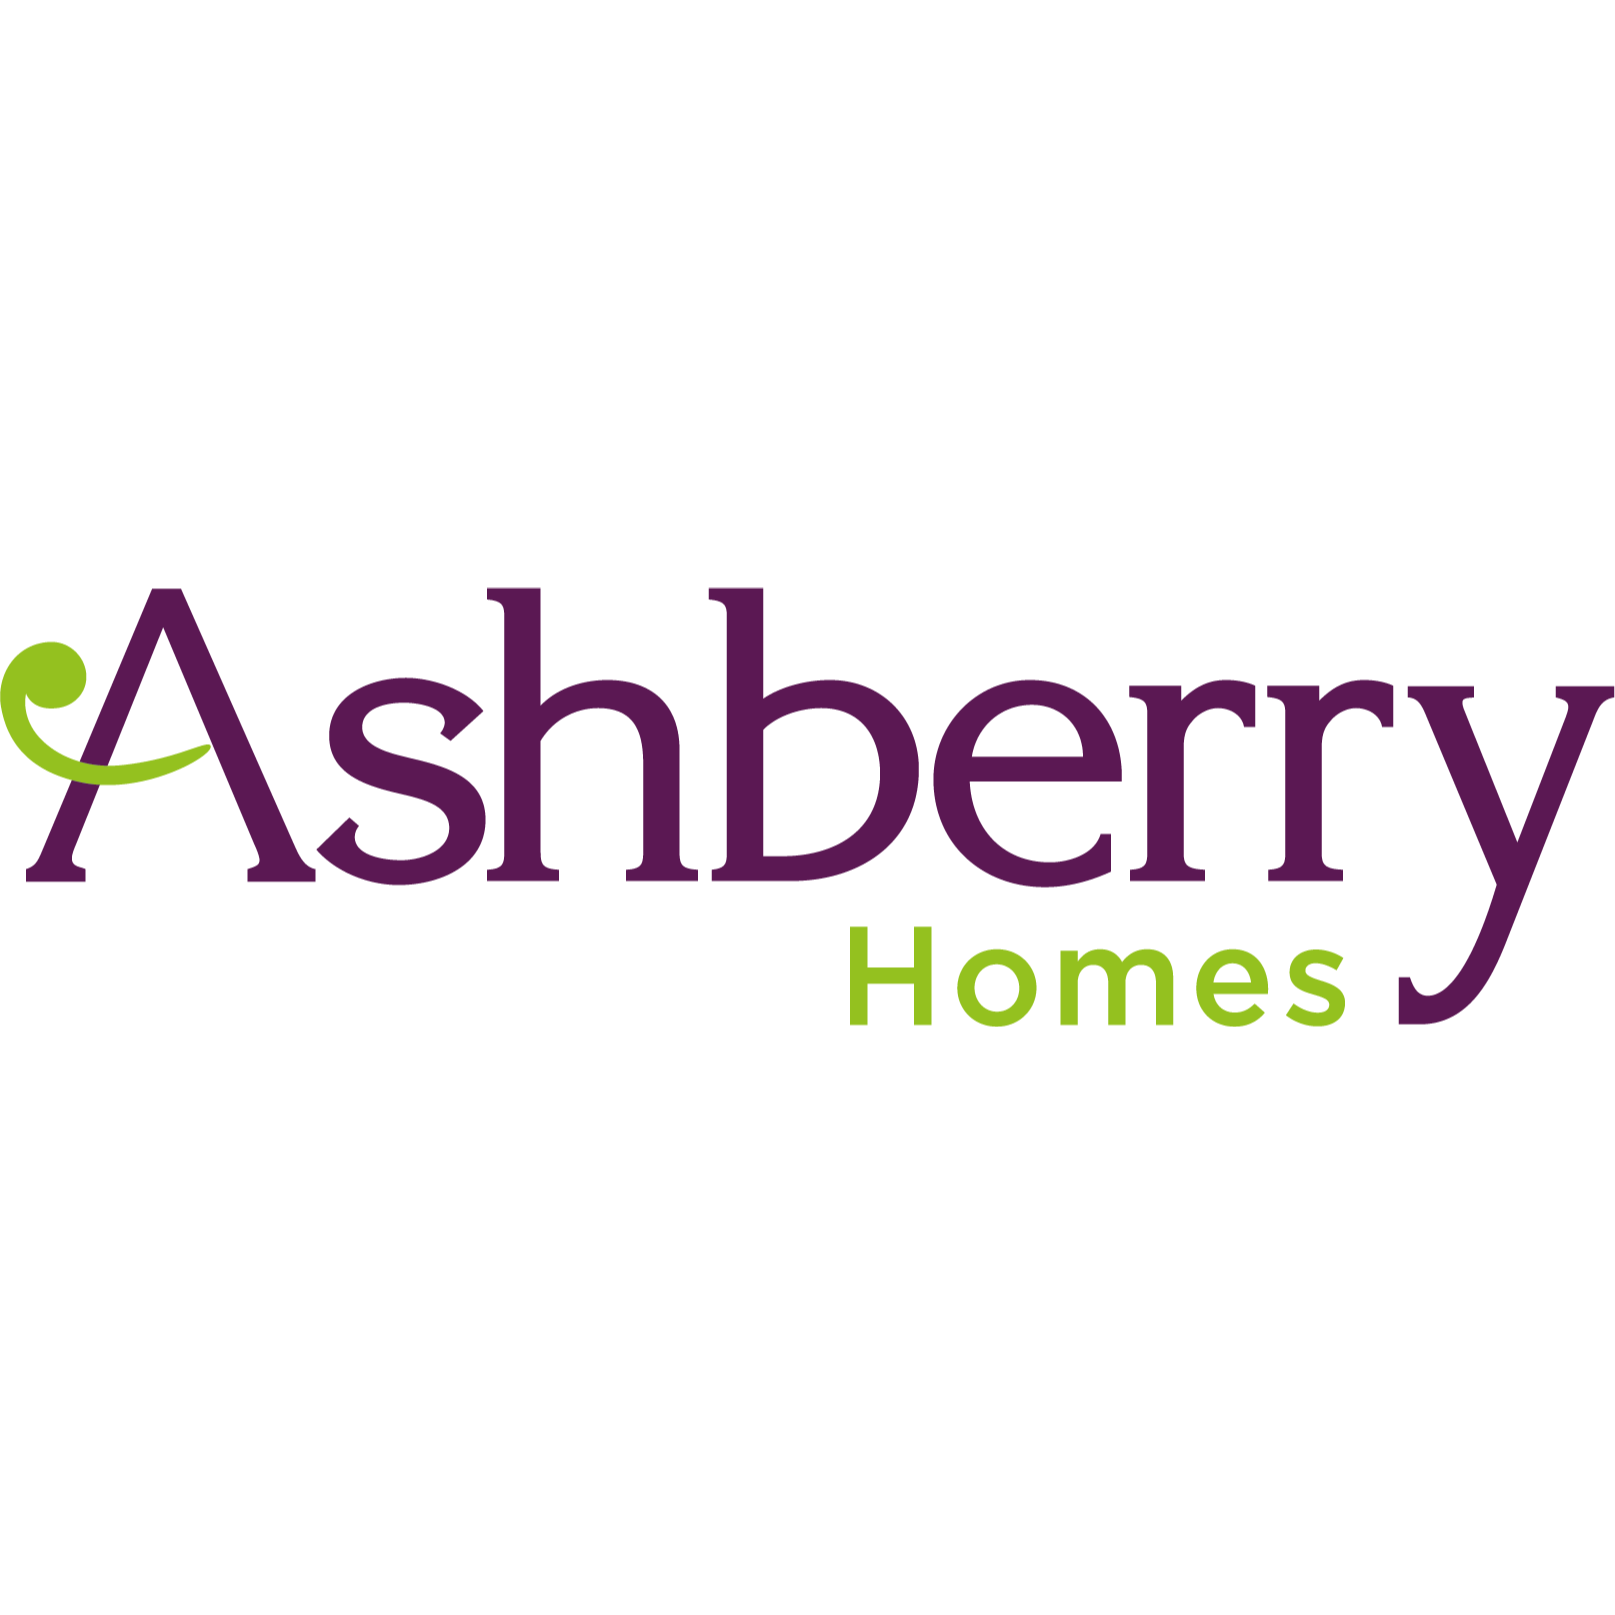 Ashberry Homes - Ashberry at Whitford Heights - Bromsgrove, Worcestershire B61 7ED - 01527 958456 | ShowMeLocal.com